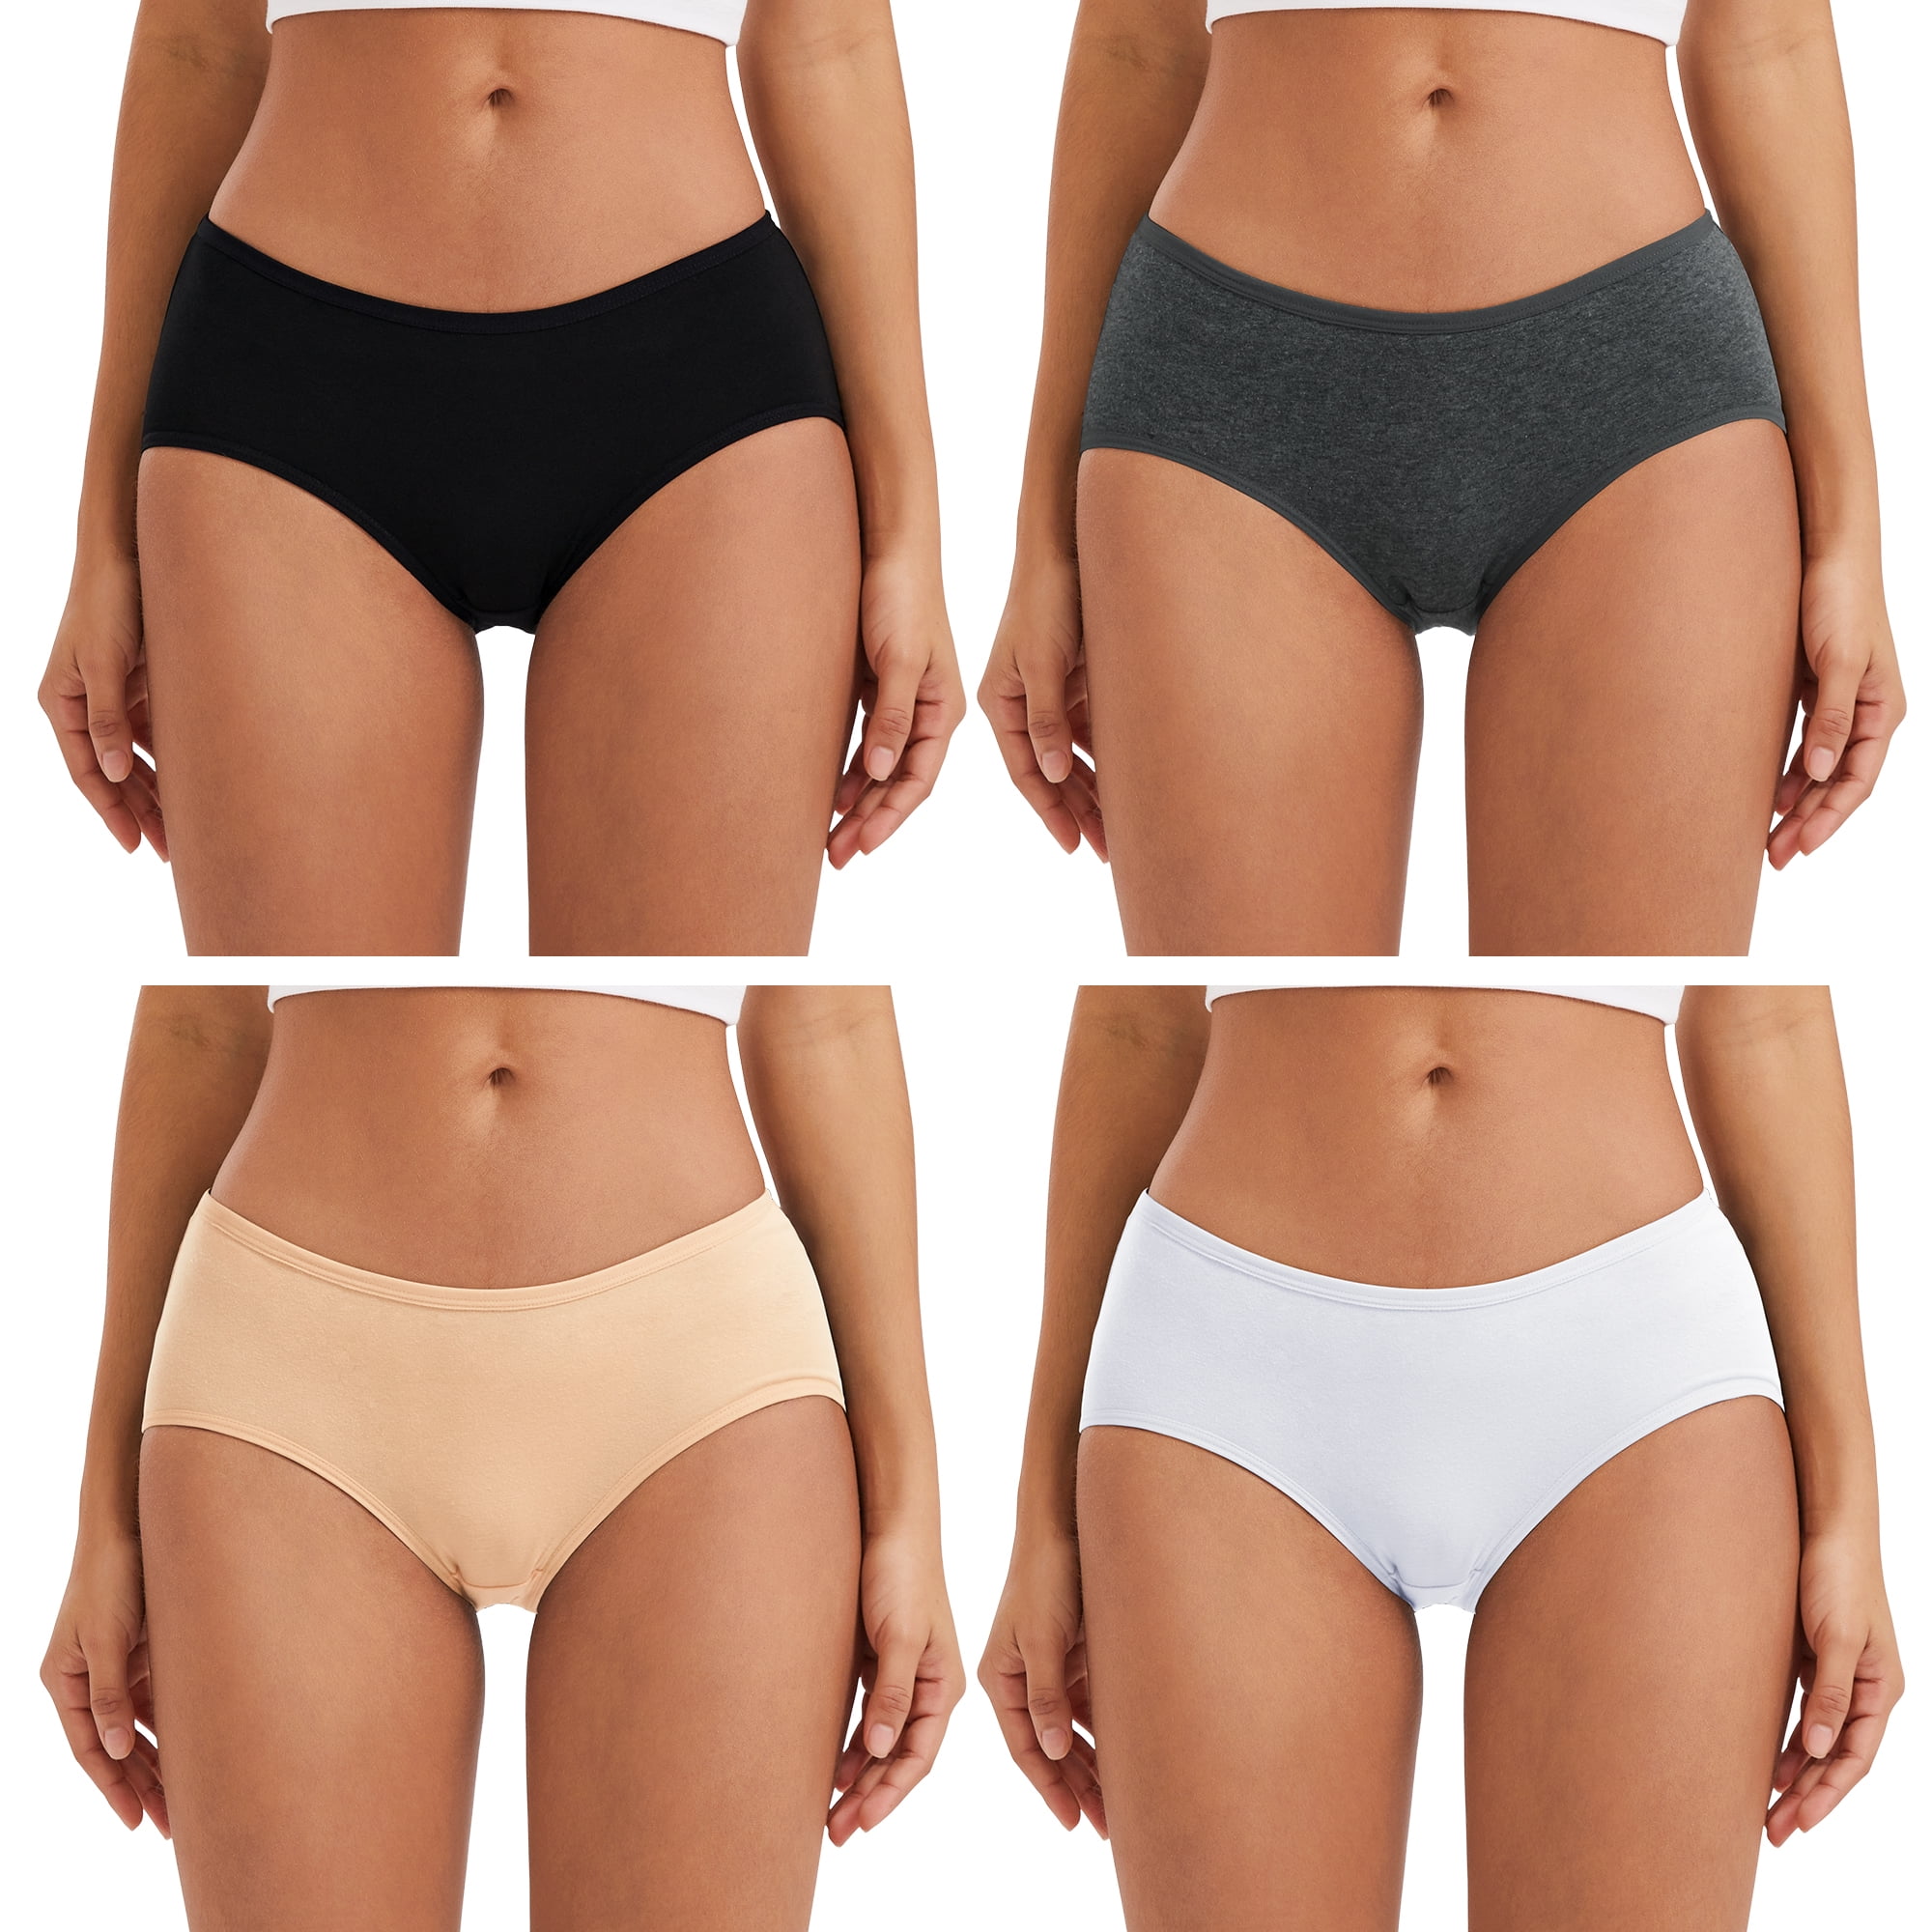 INNERSY Underwear for Women Cotton Hipster Breathable Panties 4 Pack  (M,Daily Basic)